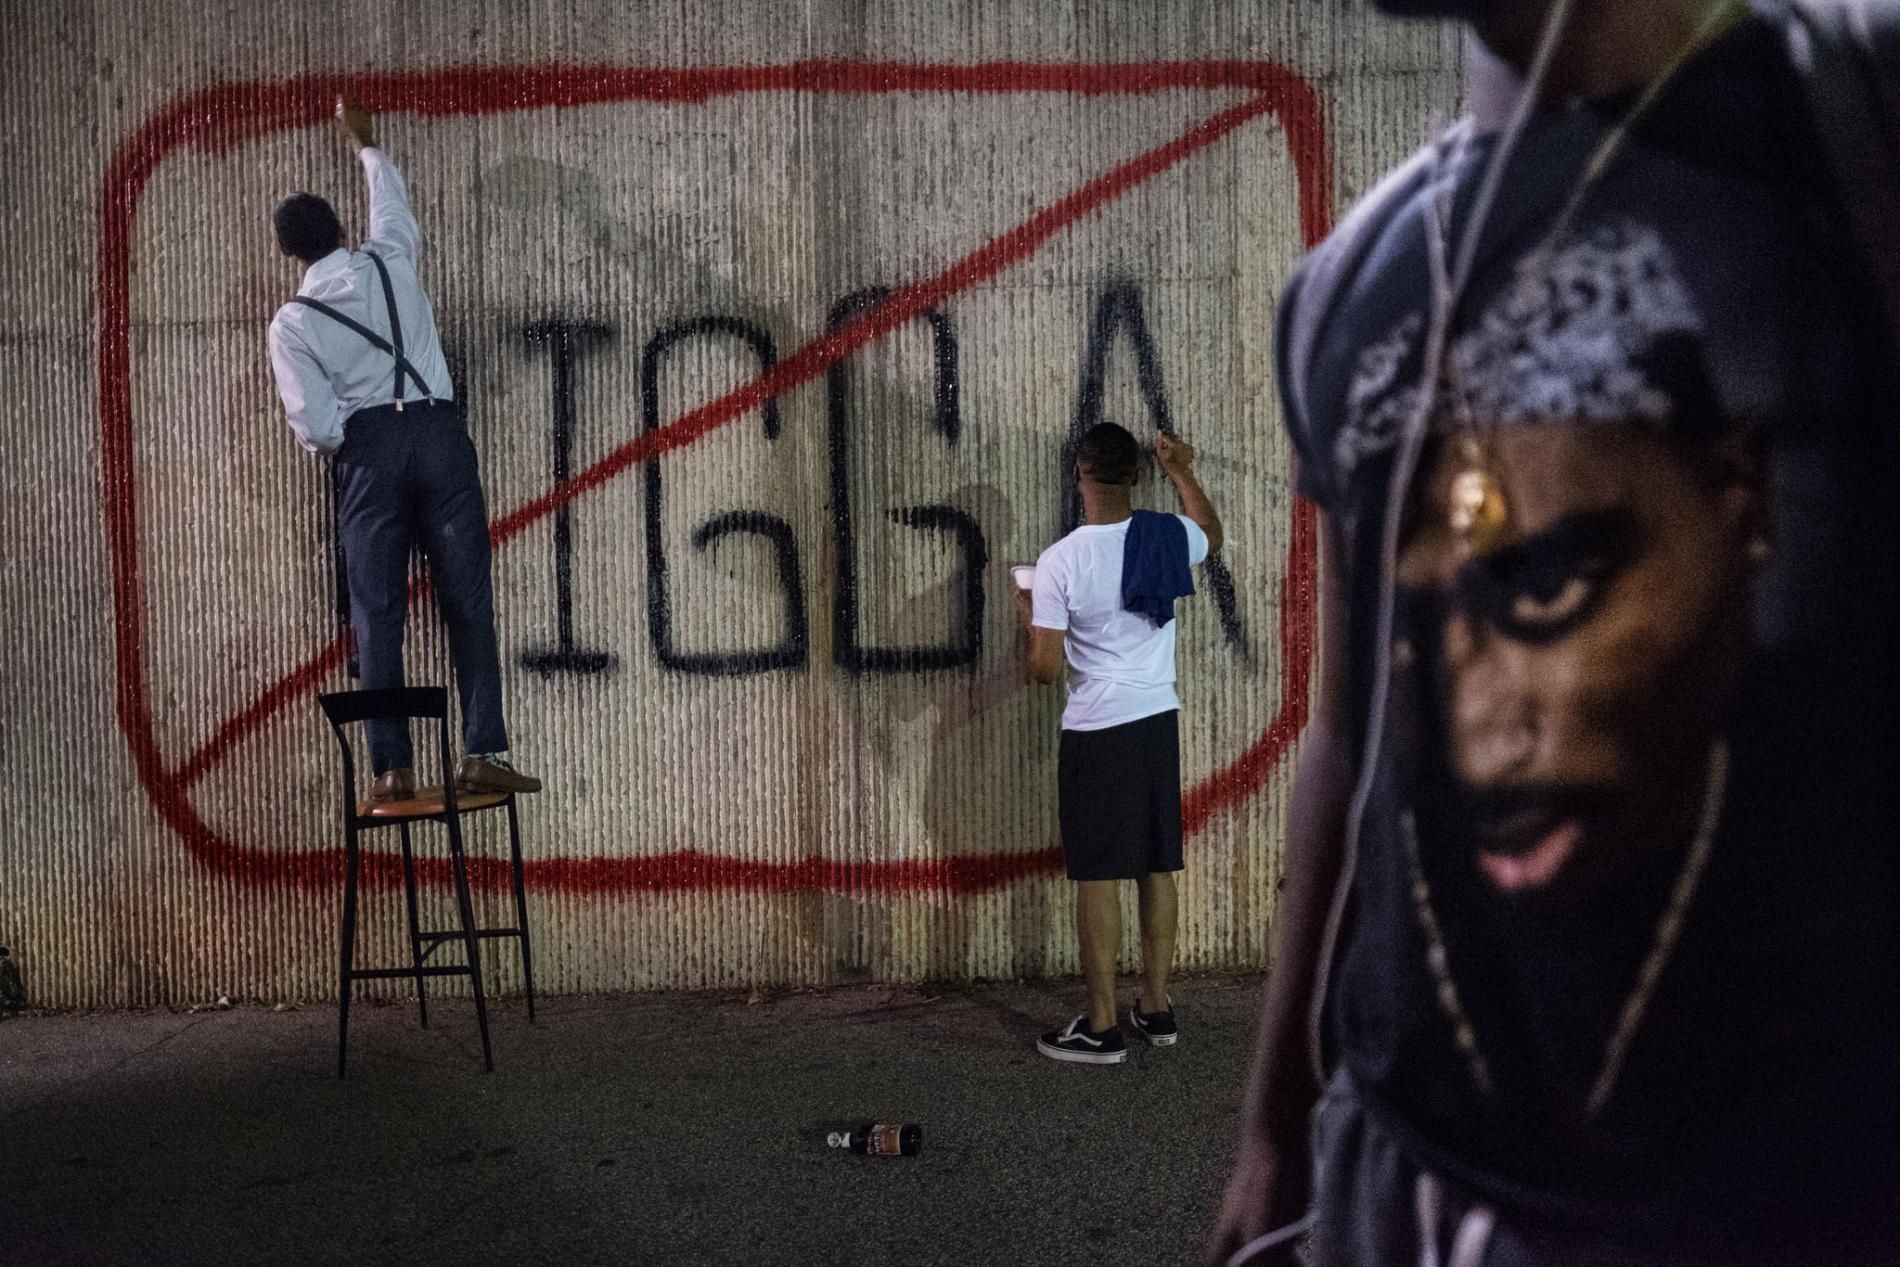 Morehouse College student government leaders John Cooper and Kamren Rollins paint a sign on campus to stimulate discussion about the N-word. Another student passes by wearing a T-shirt with an image of the late rap artist Tupac Shakur, who used the term liberally in his lyrics. Image by Radcliffe "Ruddy" Roye. United States, 2017.